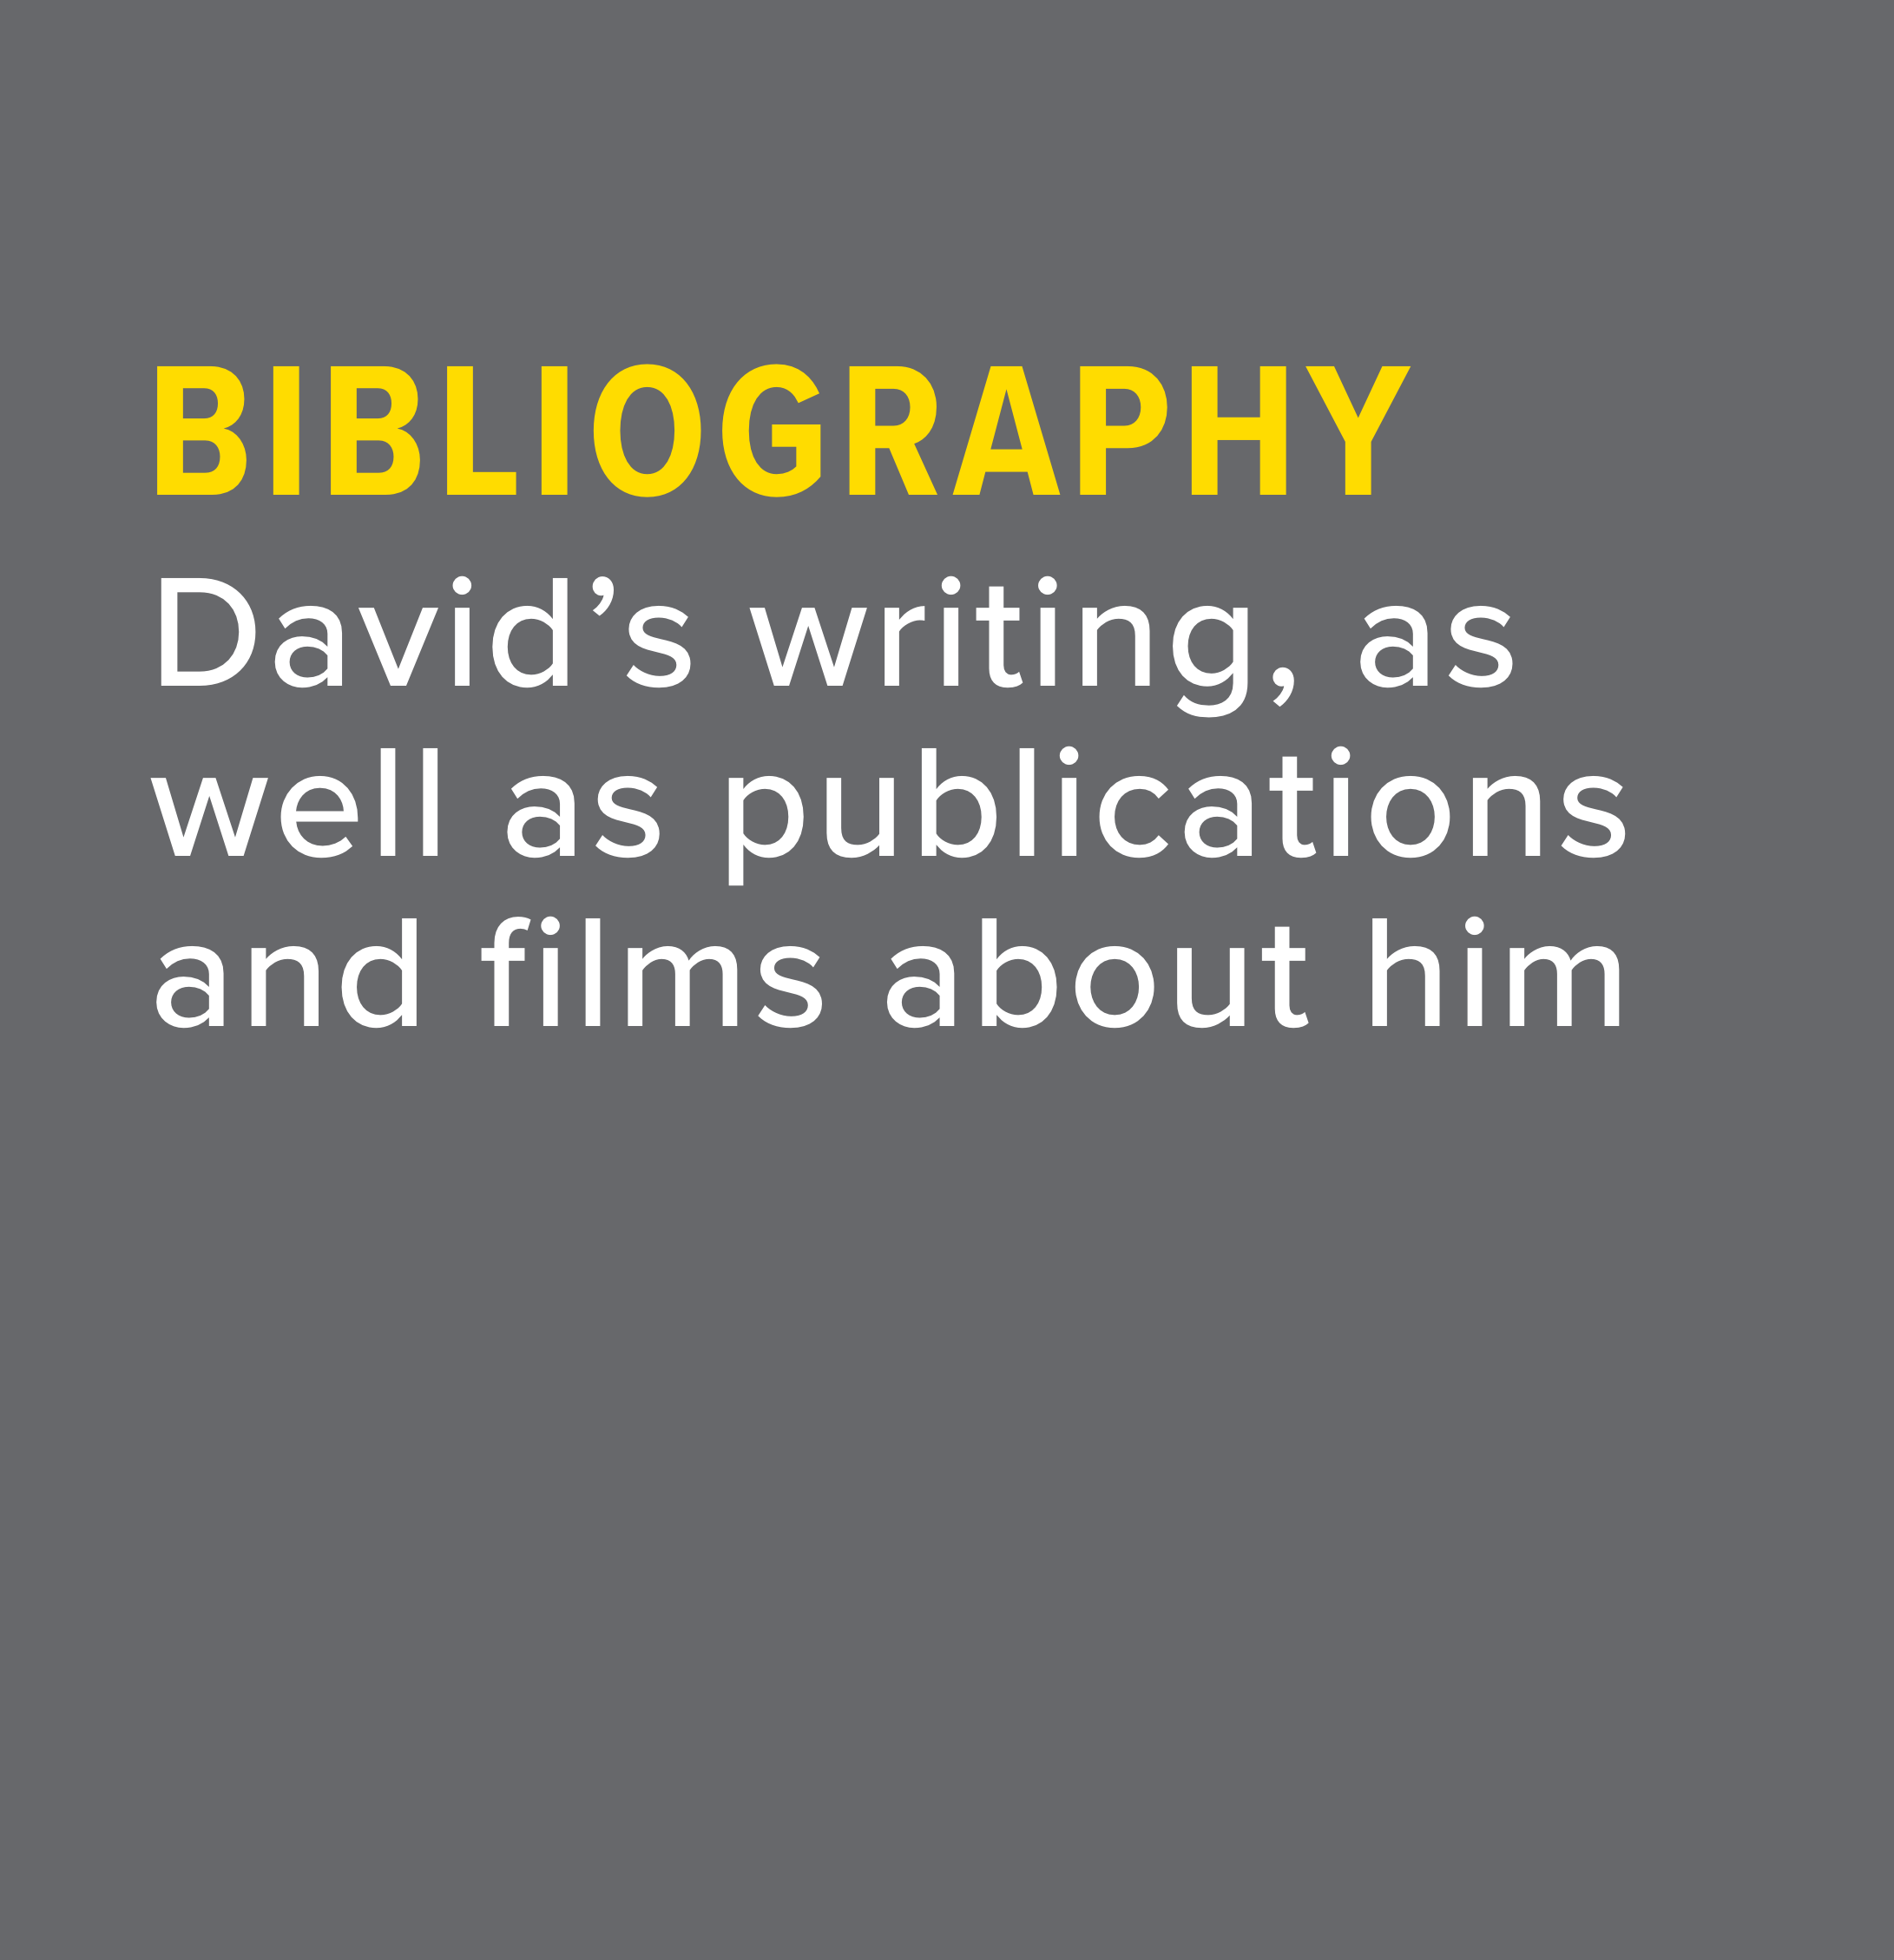 David’s writing, as well as publications and films about him